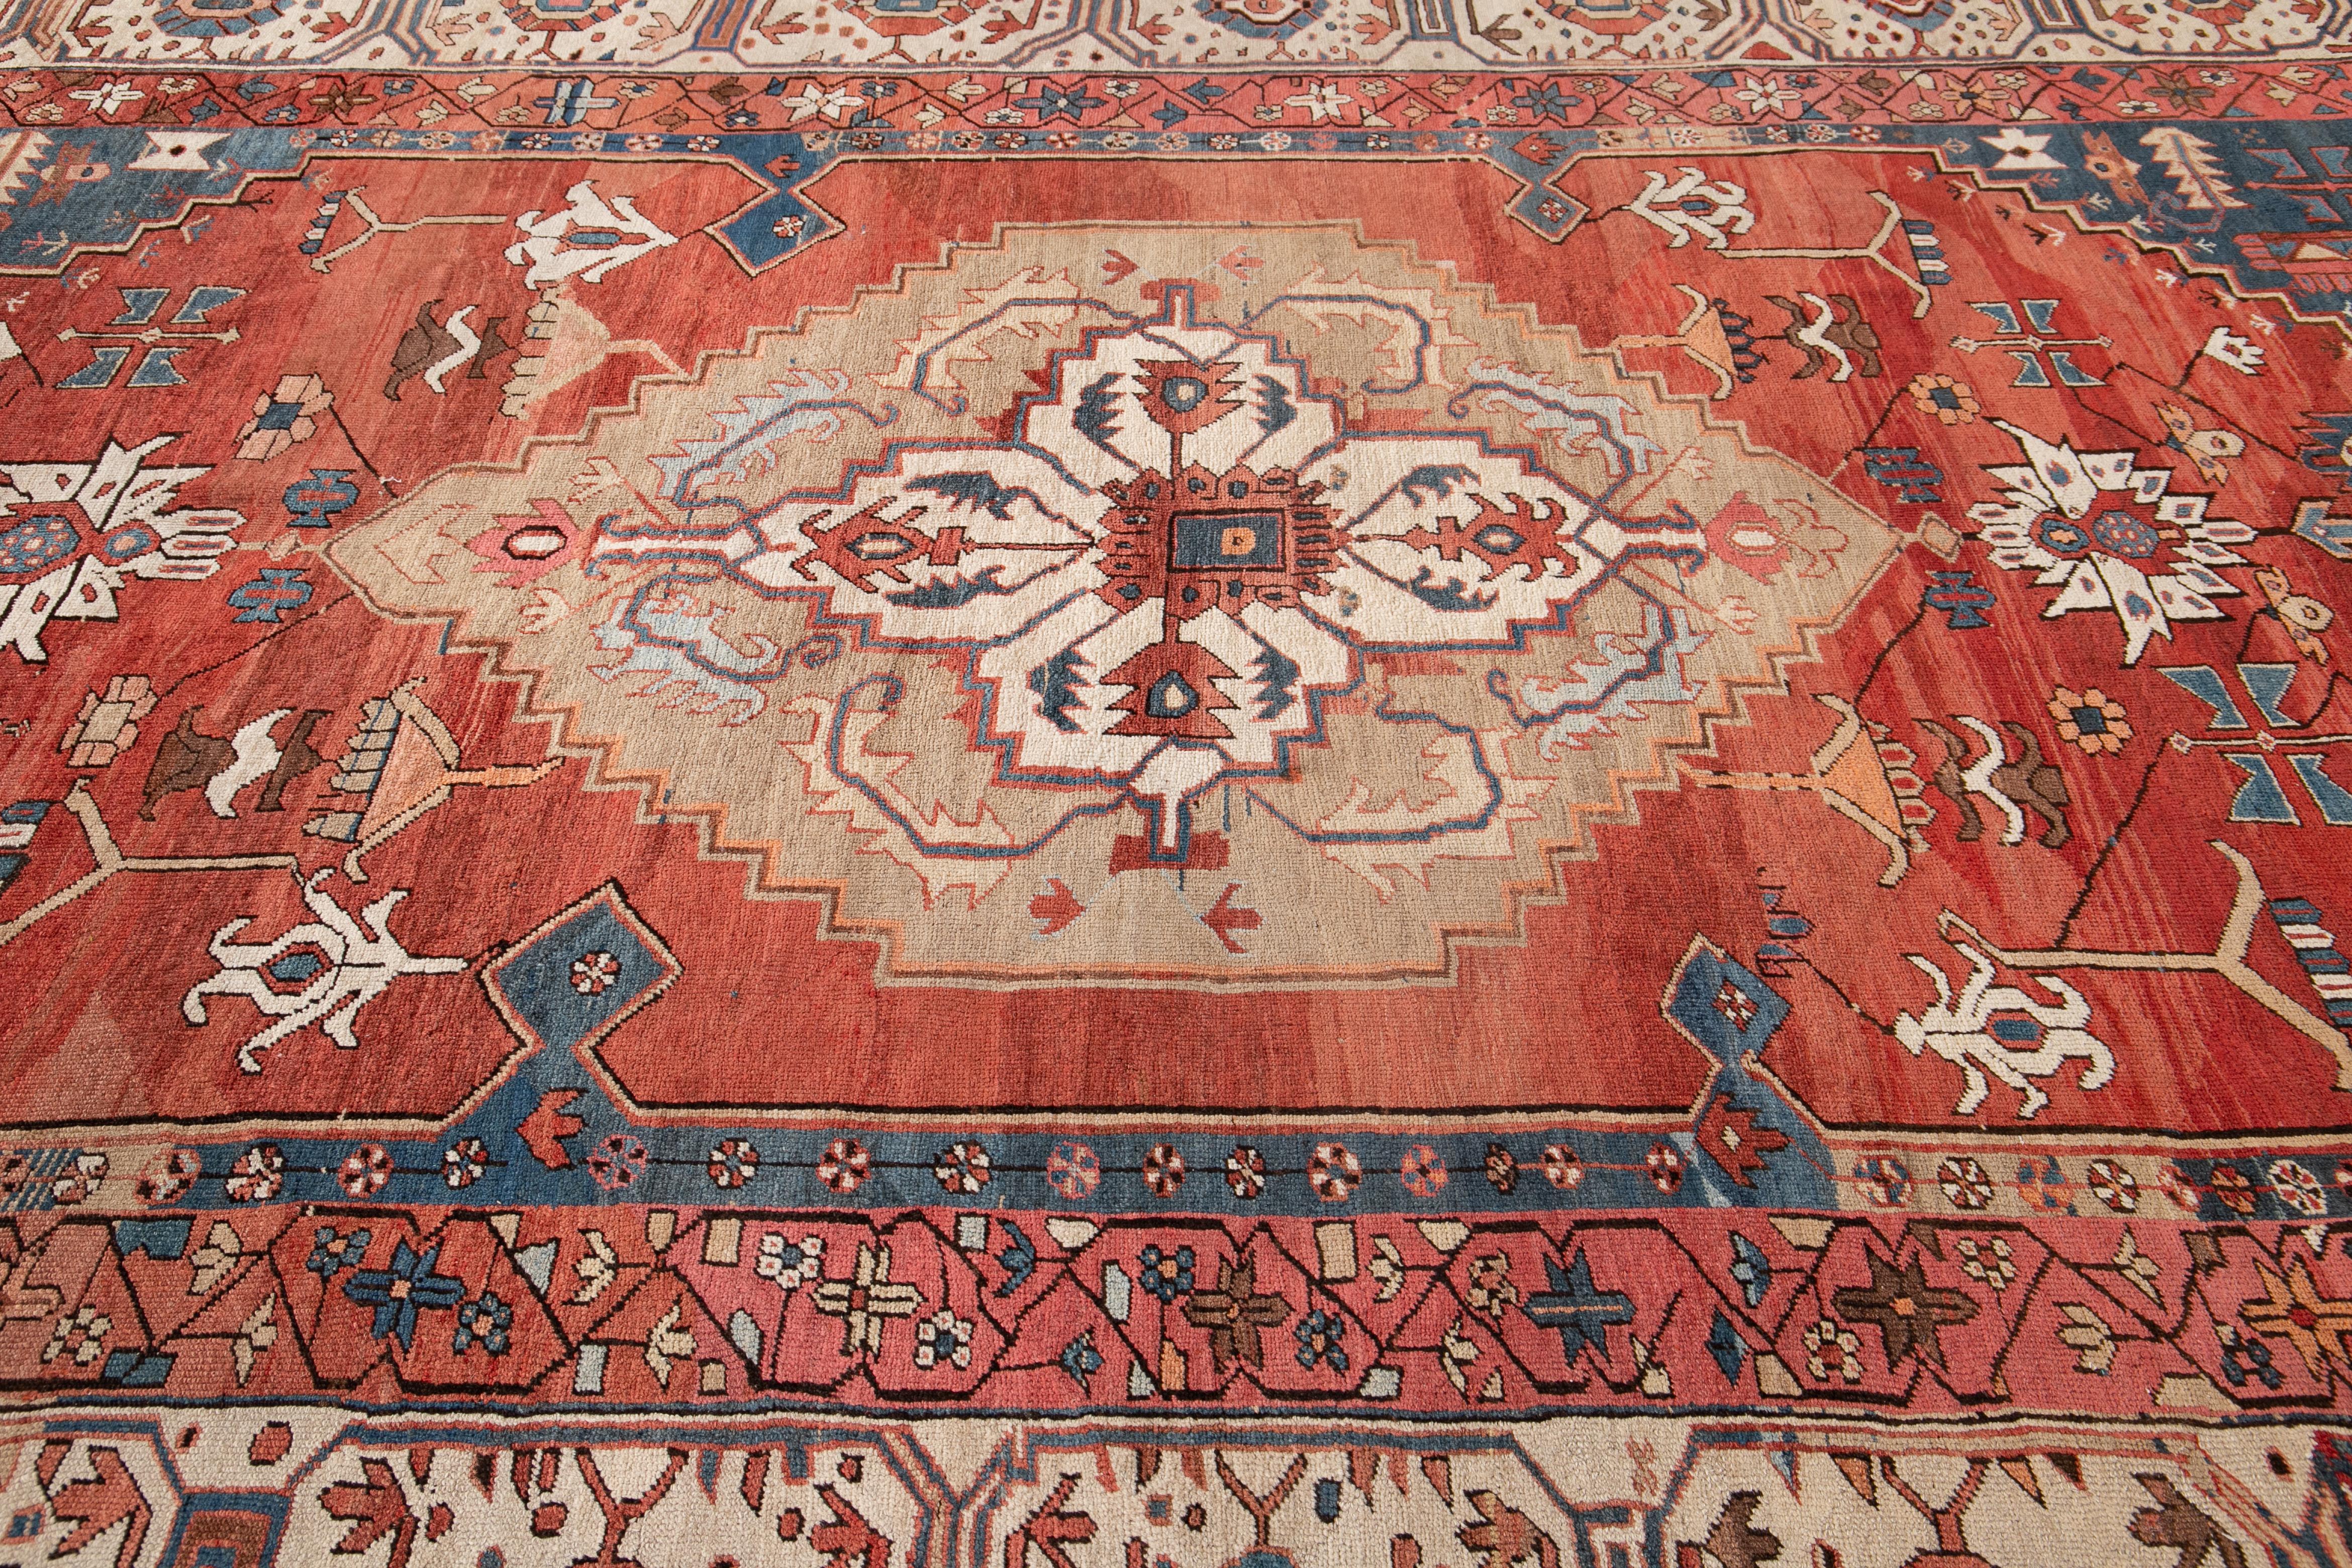 Beautiful antique Serapi rug, hand knotted wool with a rust field and blue and beige accent with a center medallion design,
circa 1890s
This rug measures 9' 7